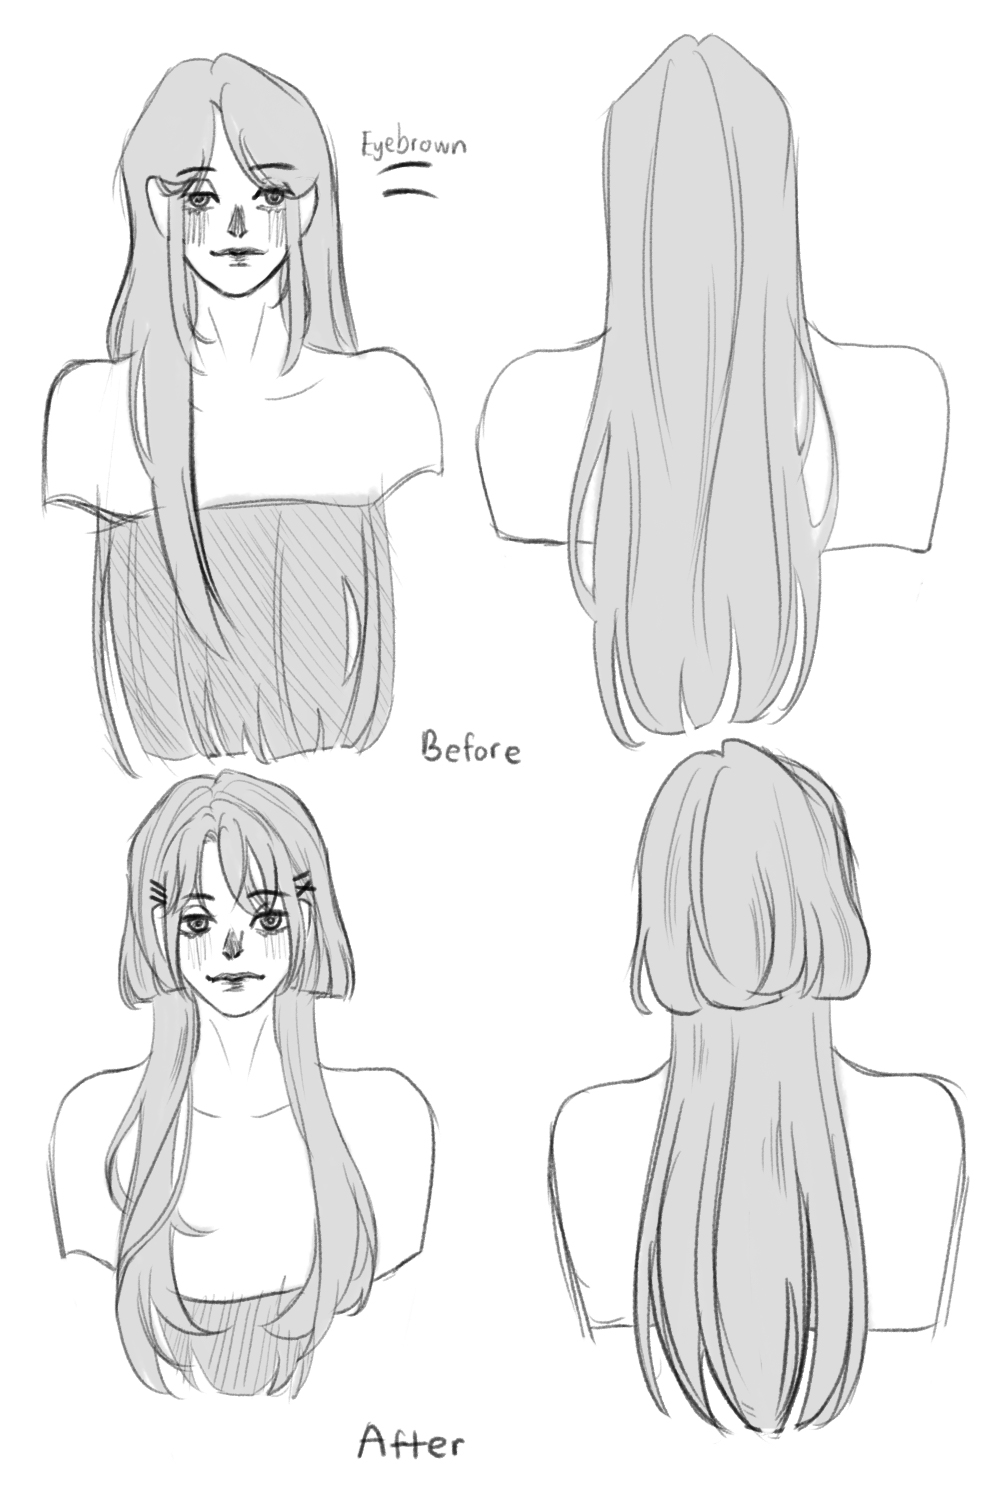 Hair reference 2 by Disaya on DeviantArt